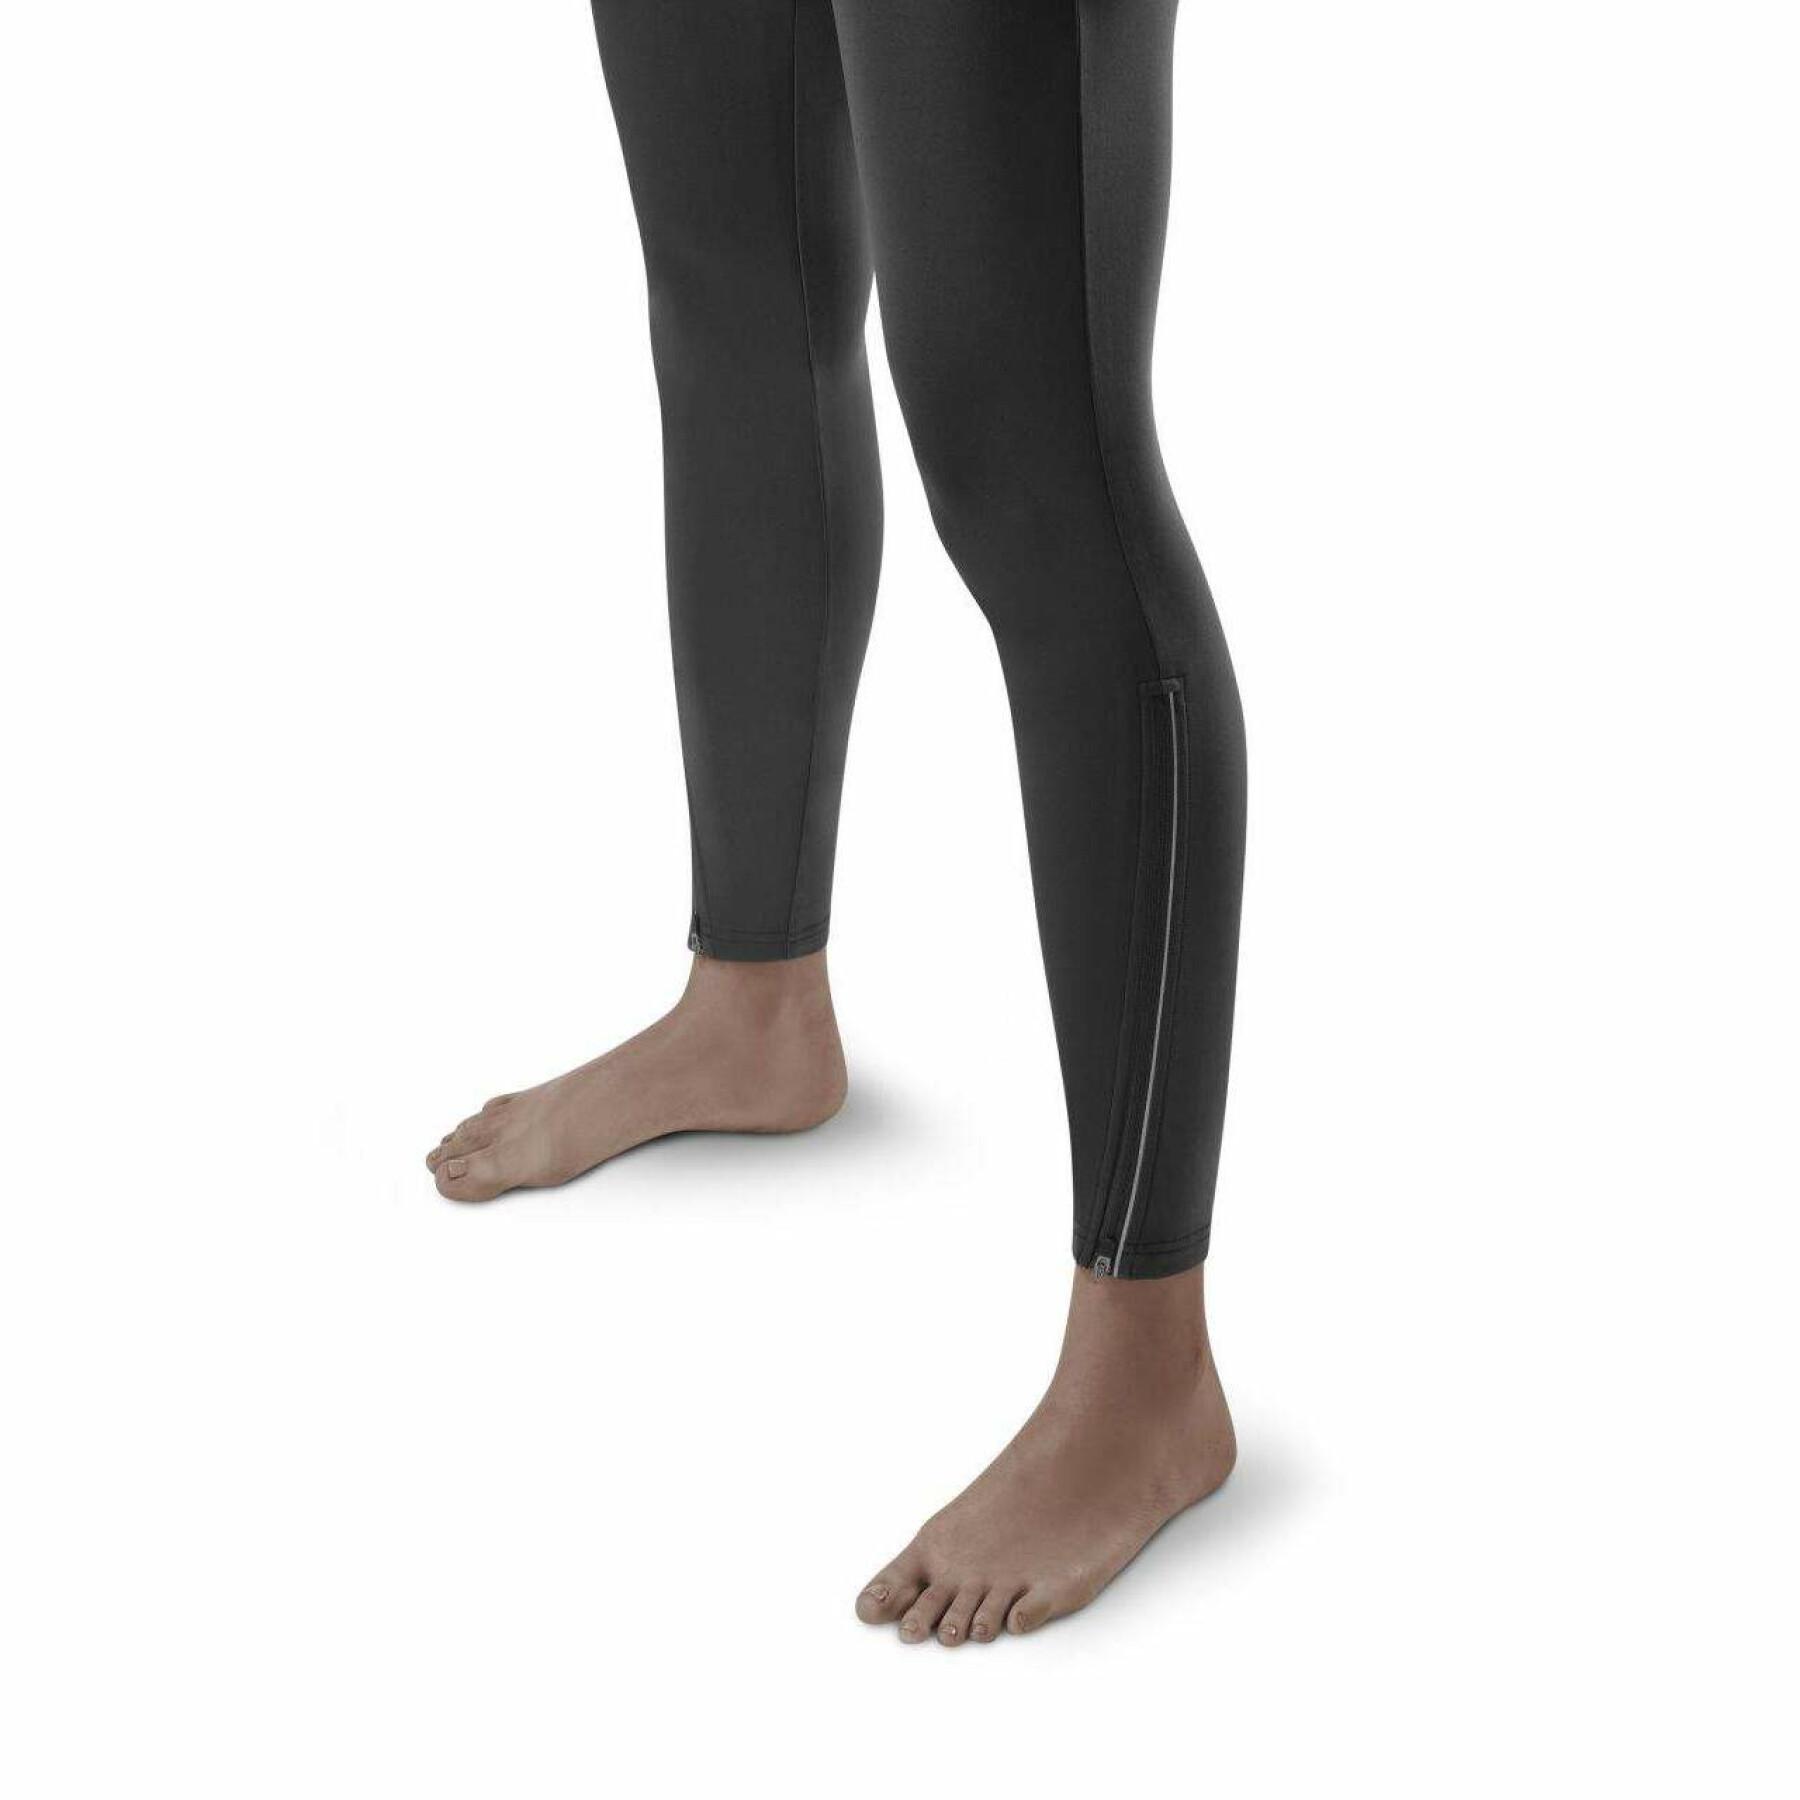 Legging woman CEP Compression winter - Clothing running - Running